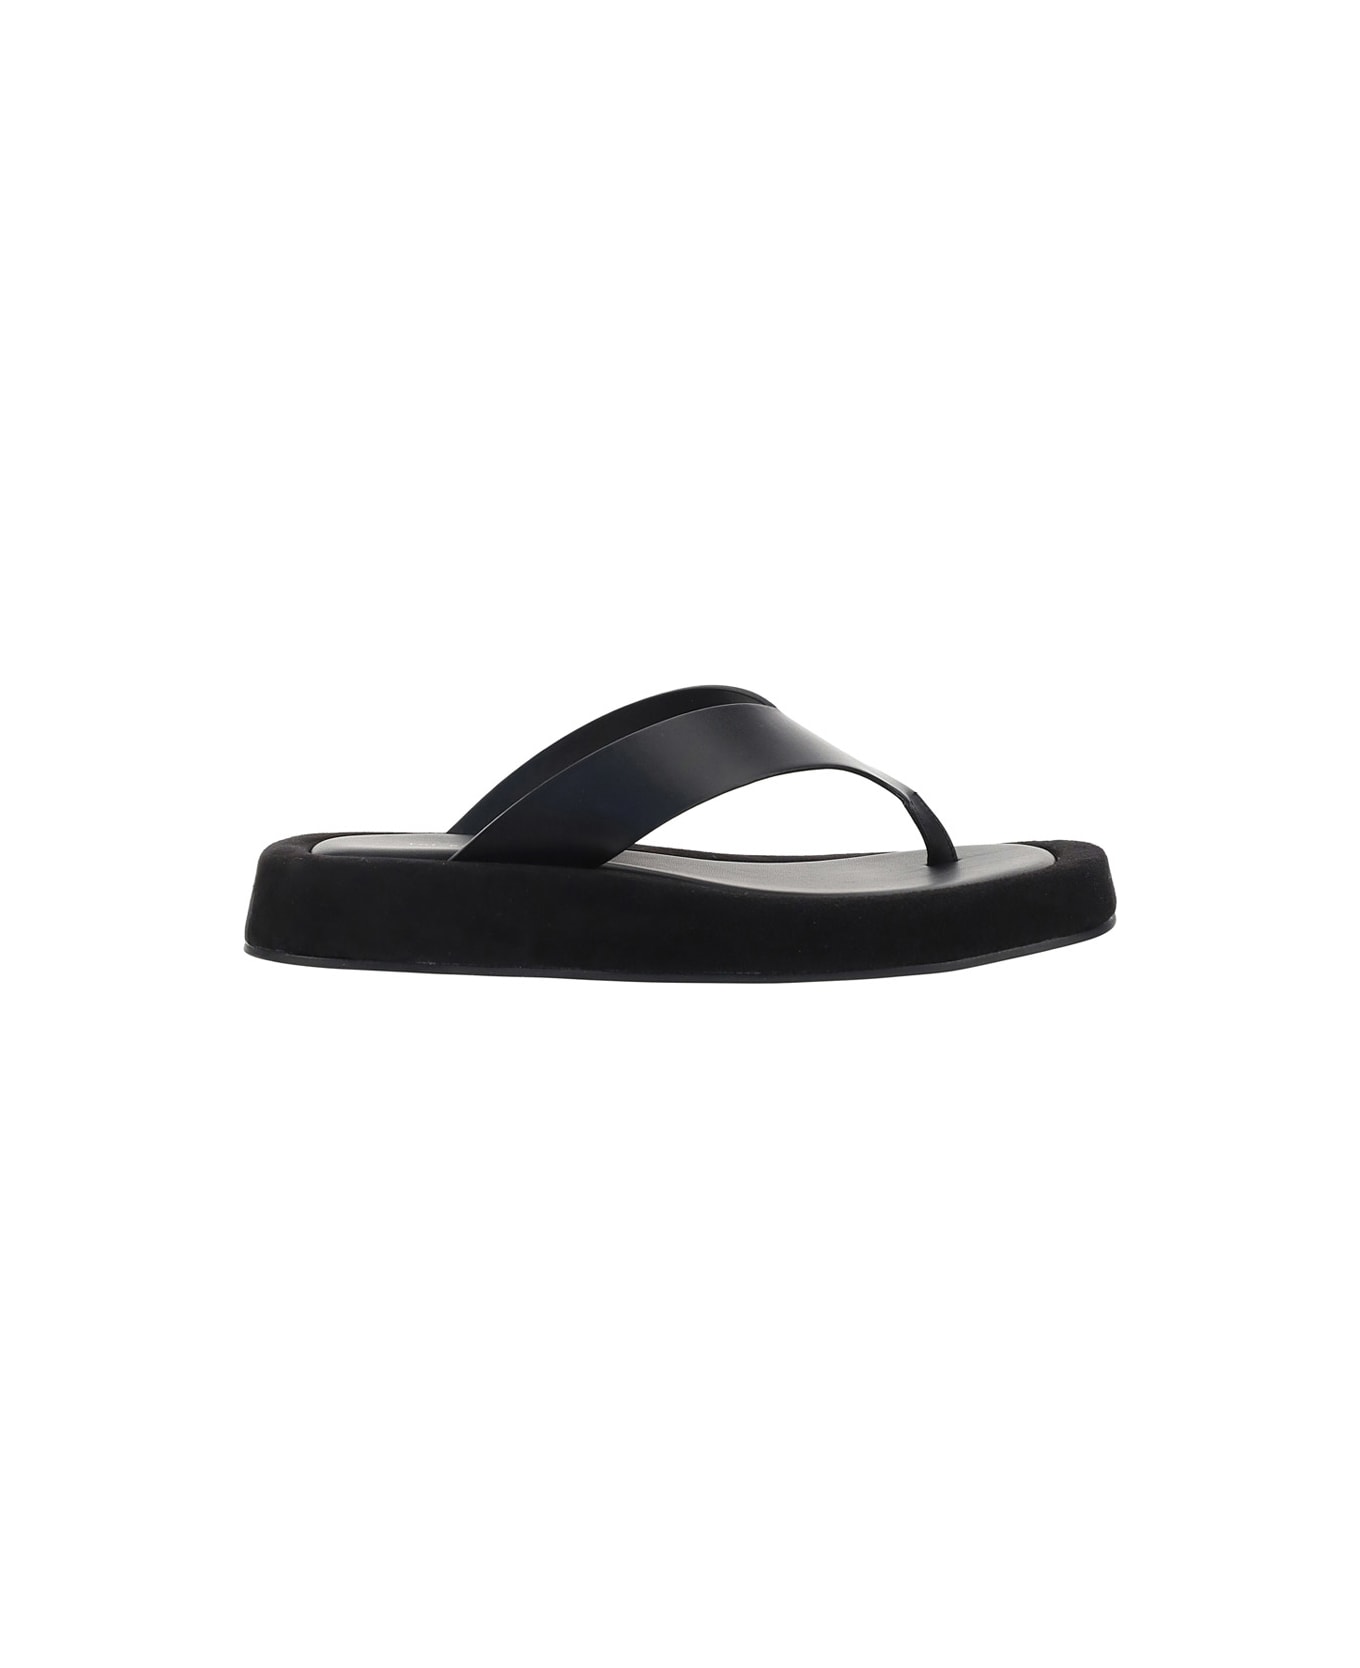 The Row Ginza Sandals - Black/black